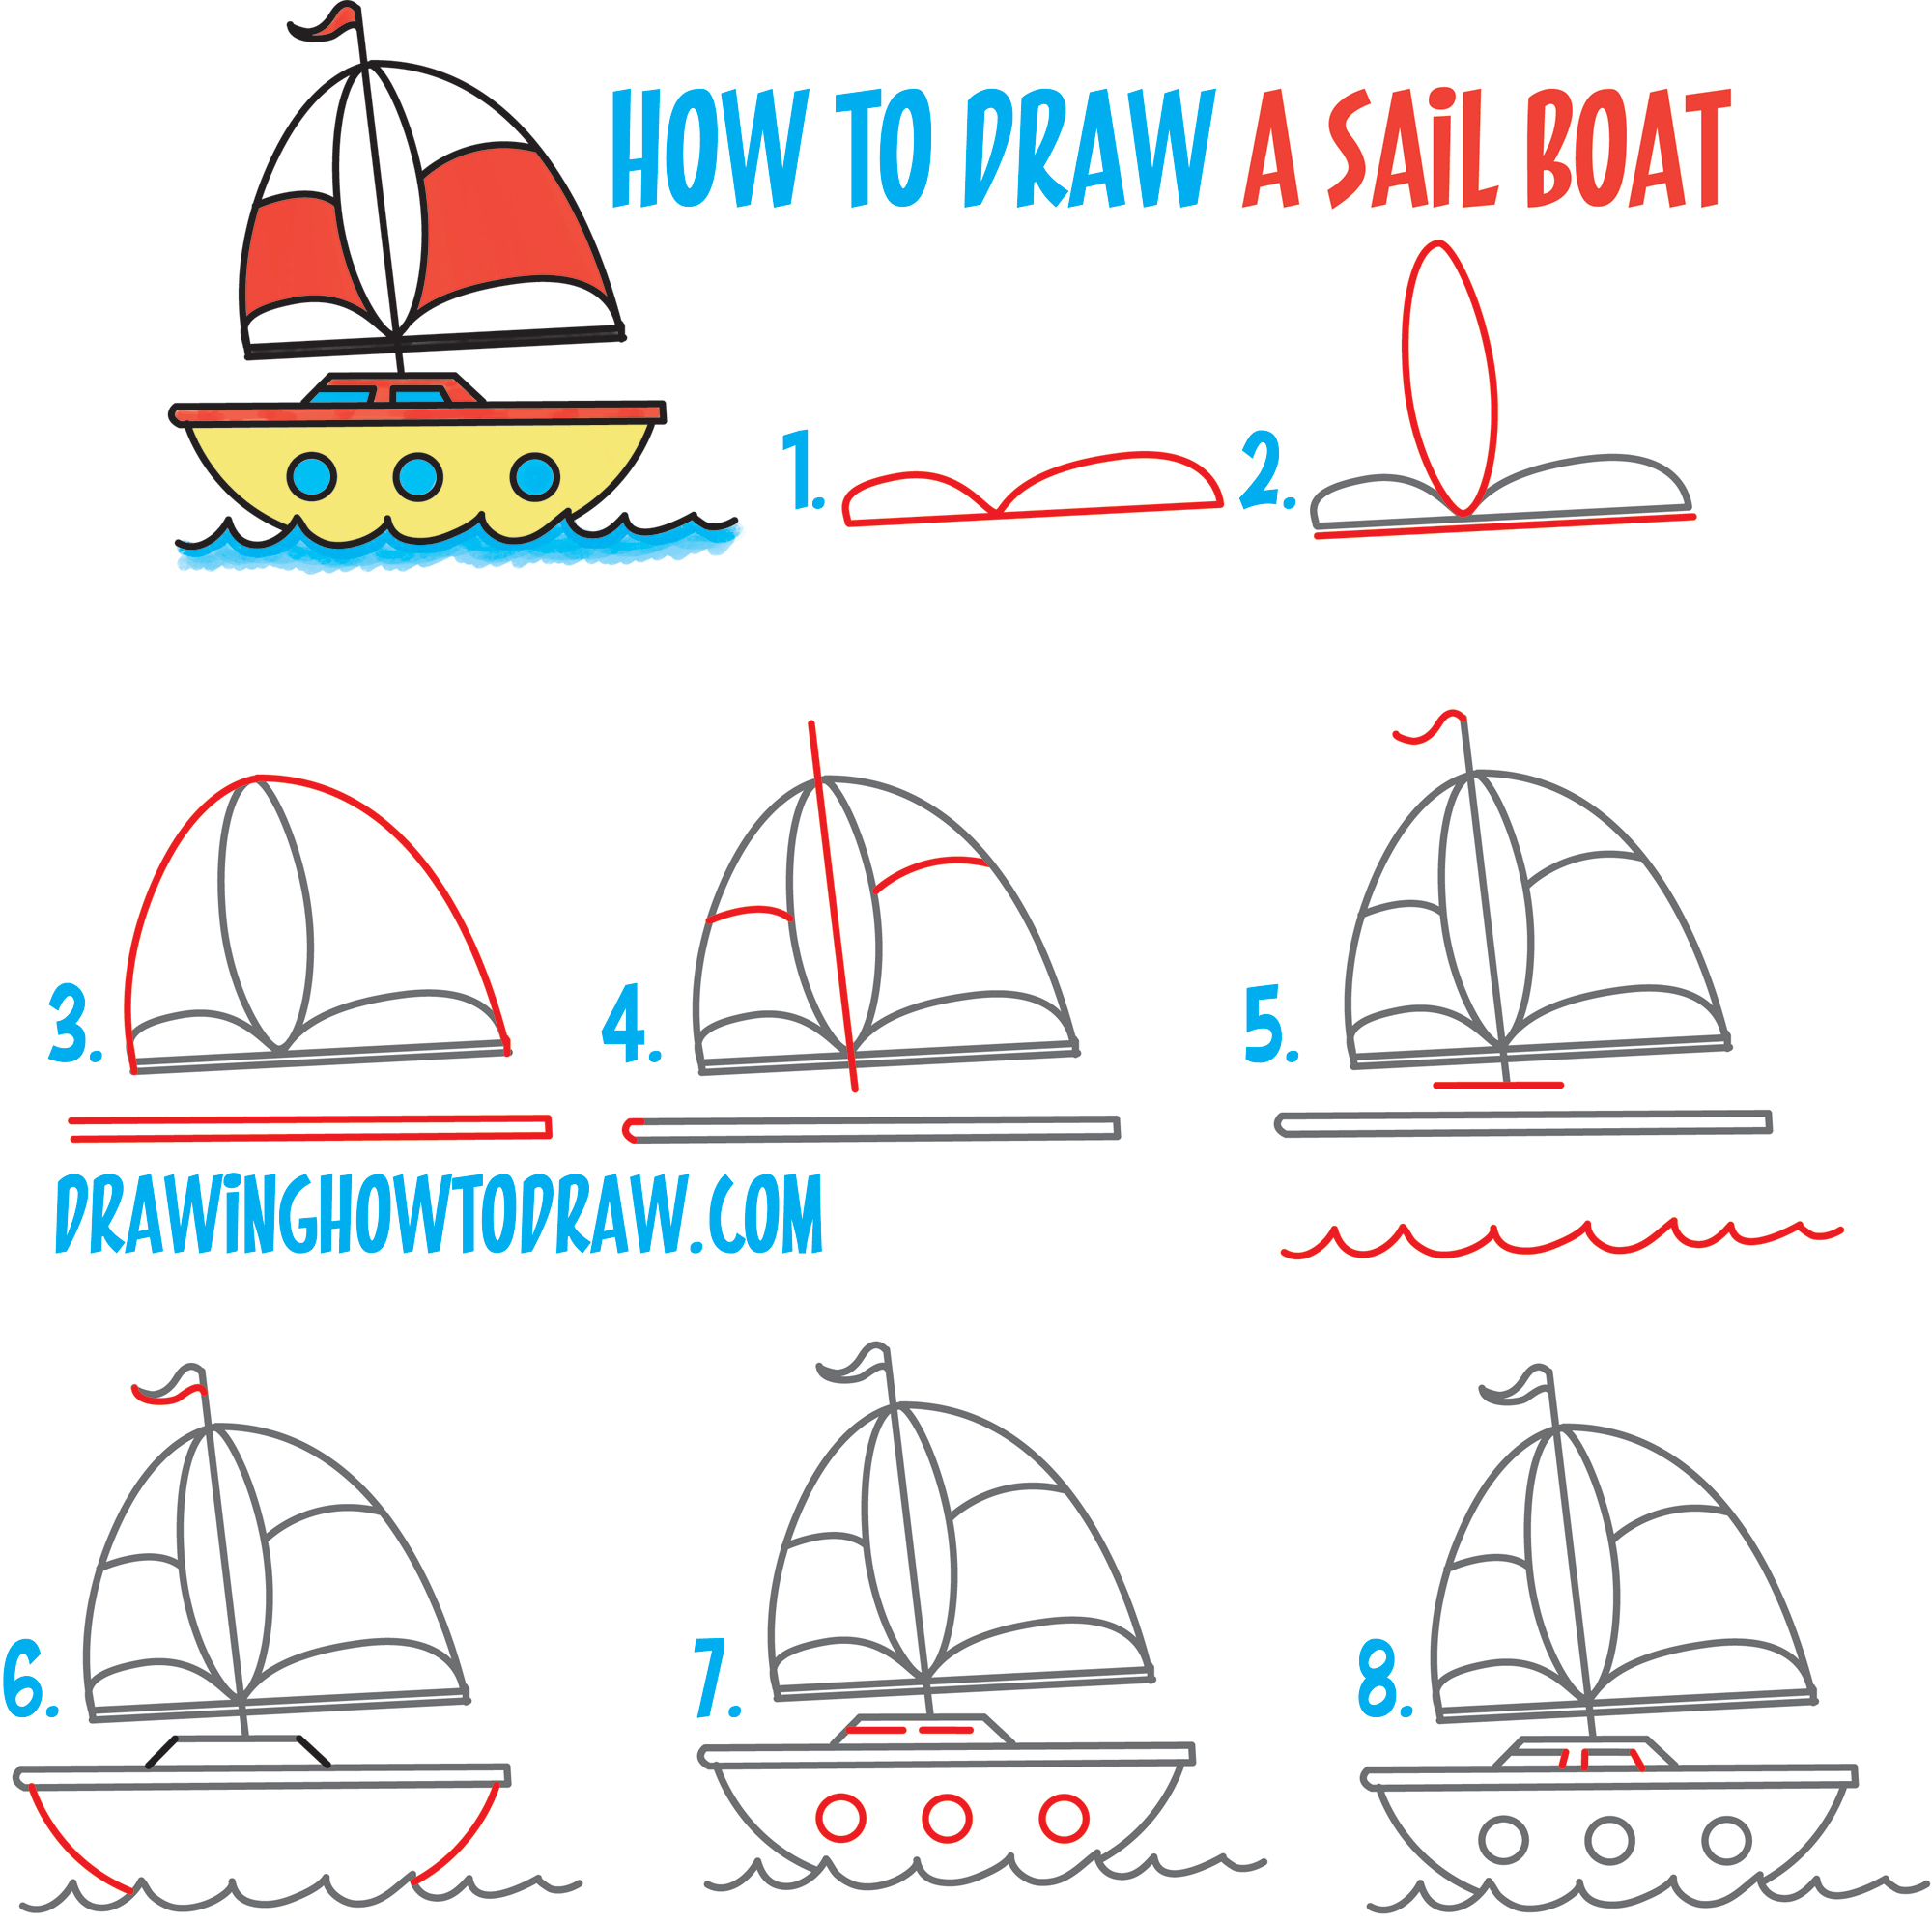 How to Draw a Cartoon Sailboat from the Letter "B" Shape Easy Step by